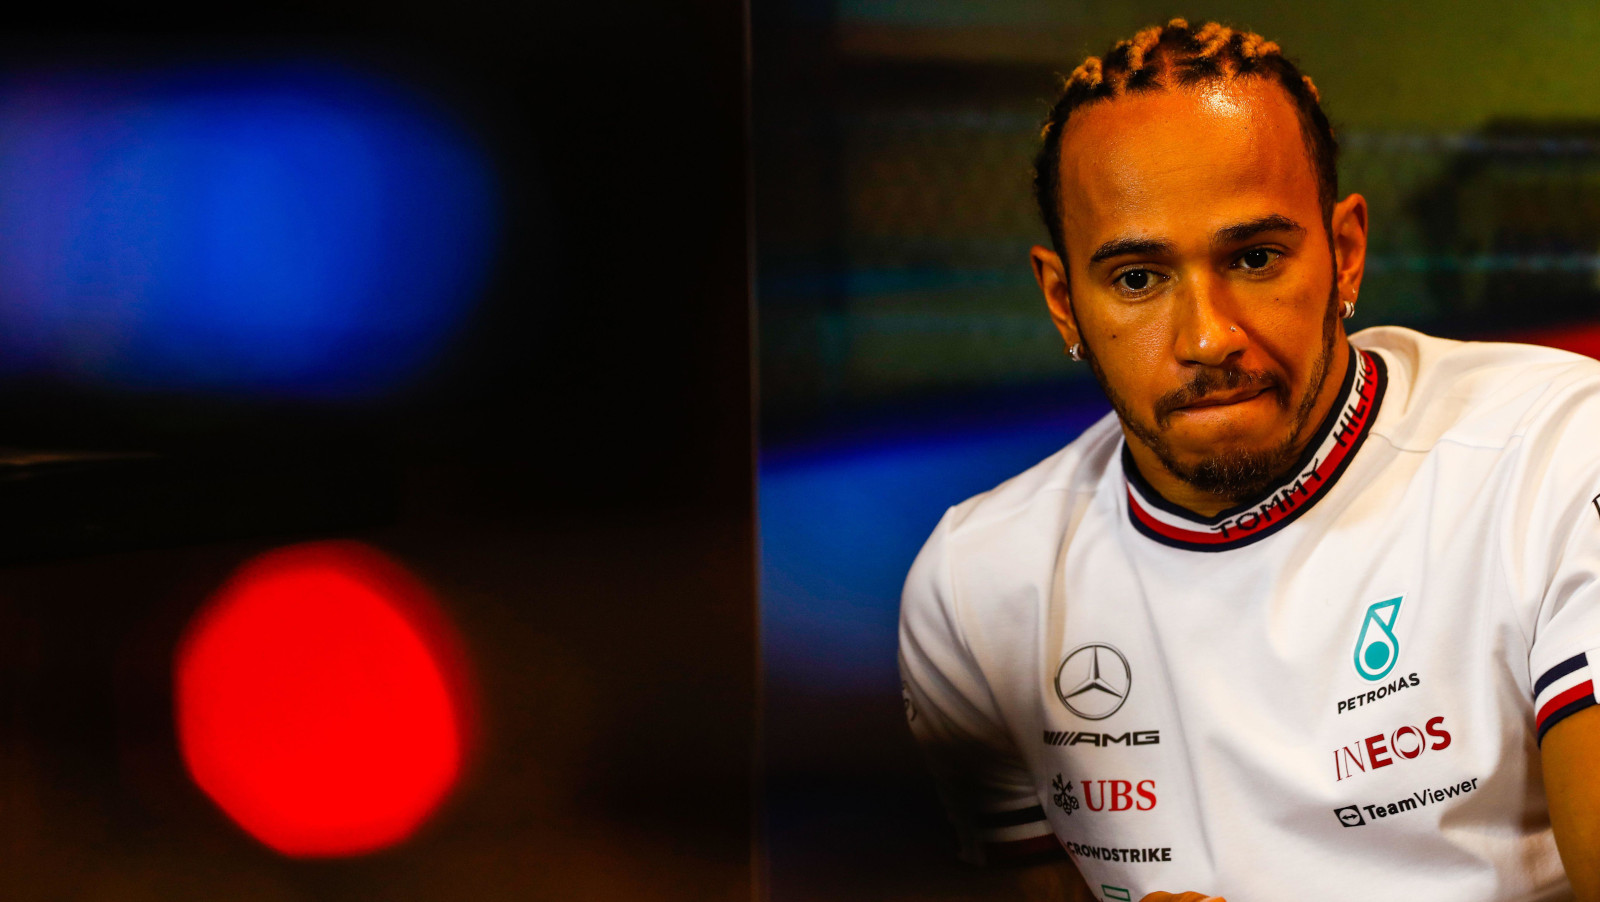 Lewis Hamilton not happy during a press conference. Baku June 2022